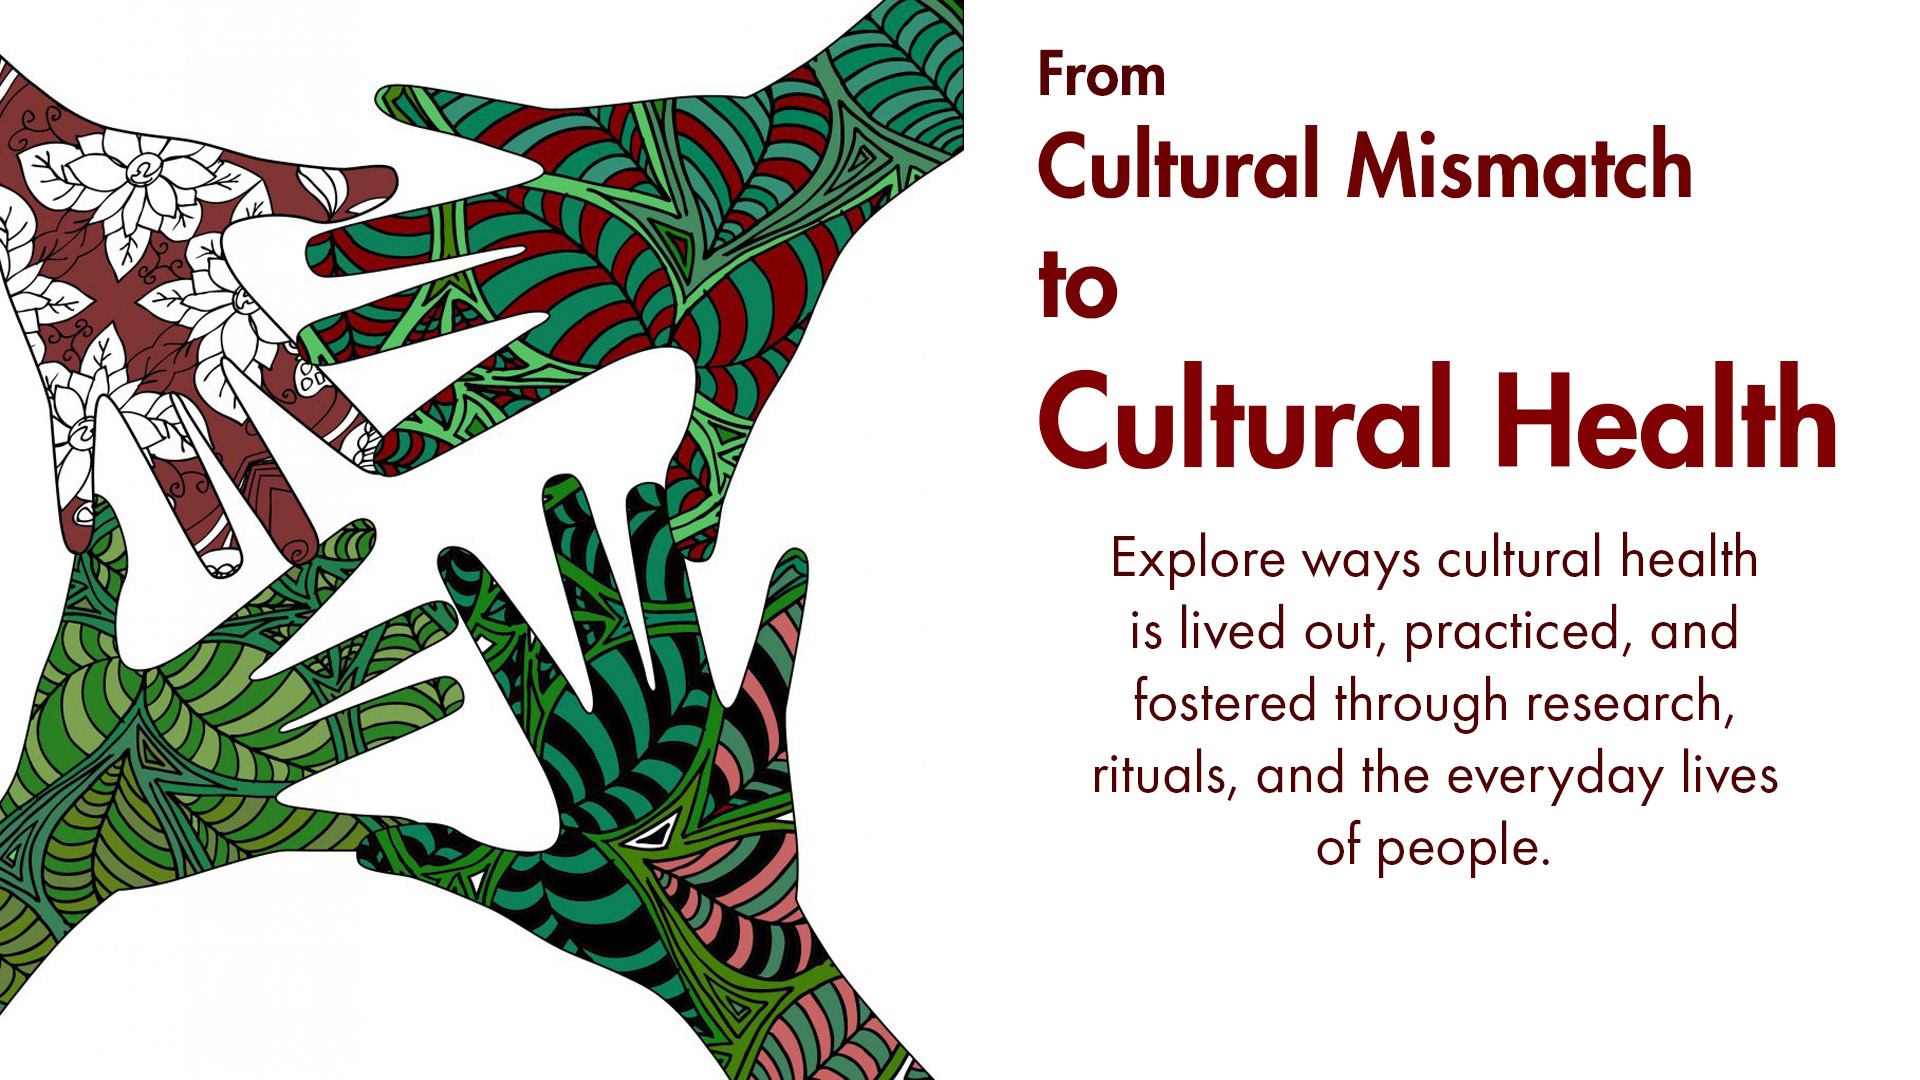 From cultural mismatch to cultural health. Explore ways cultural health is lived out, practiced, and fostered through research, rituals, and the everyday lives of people.